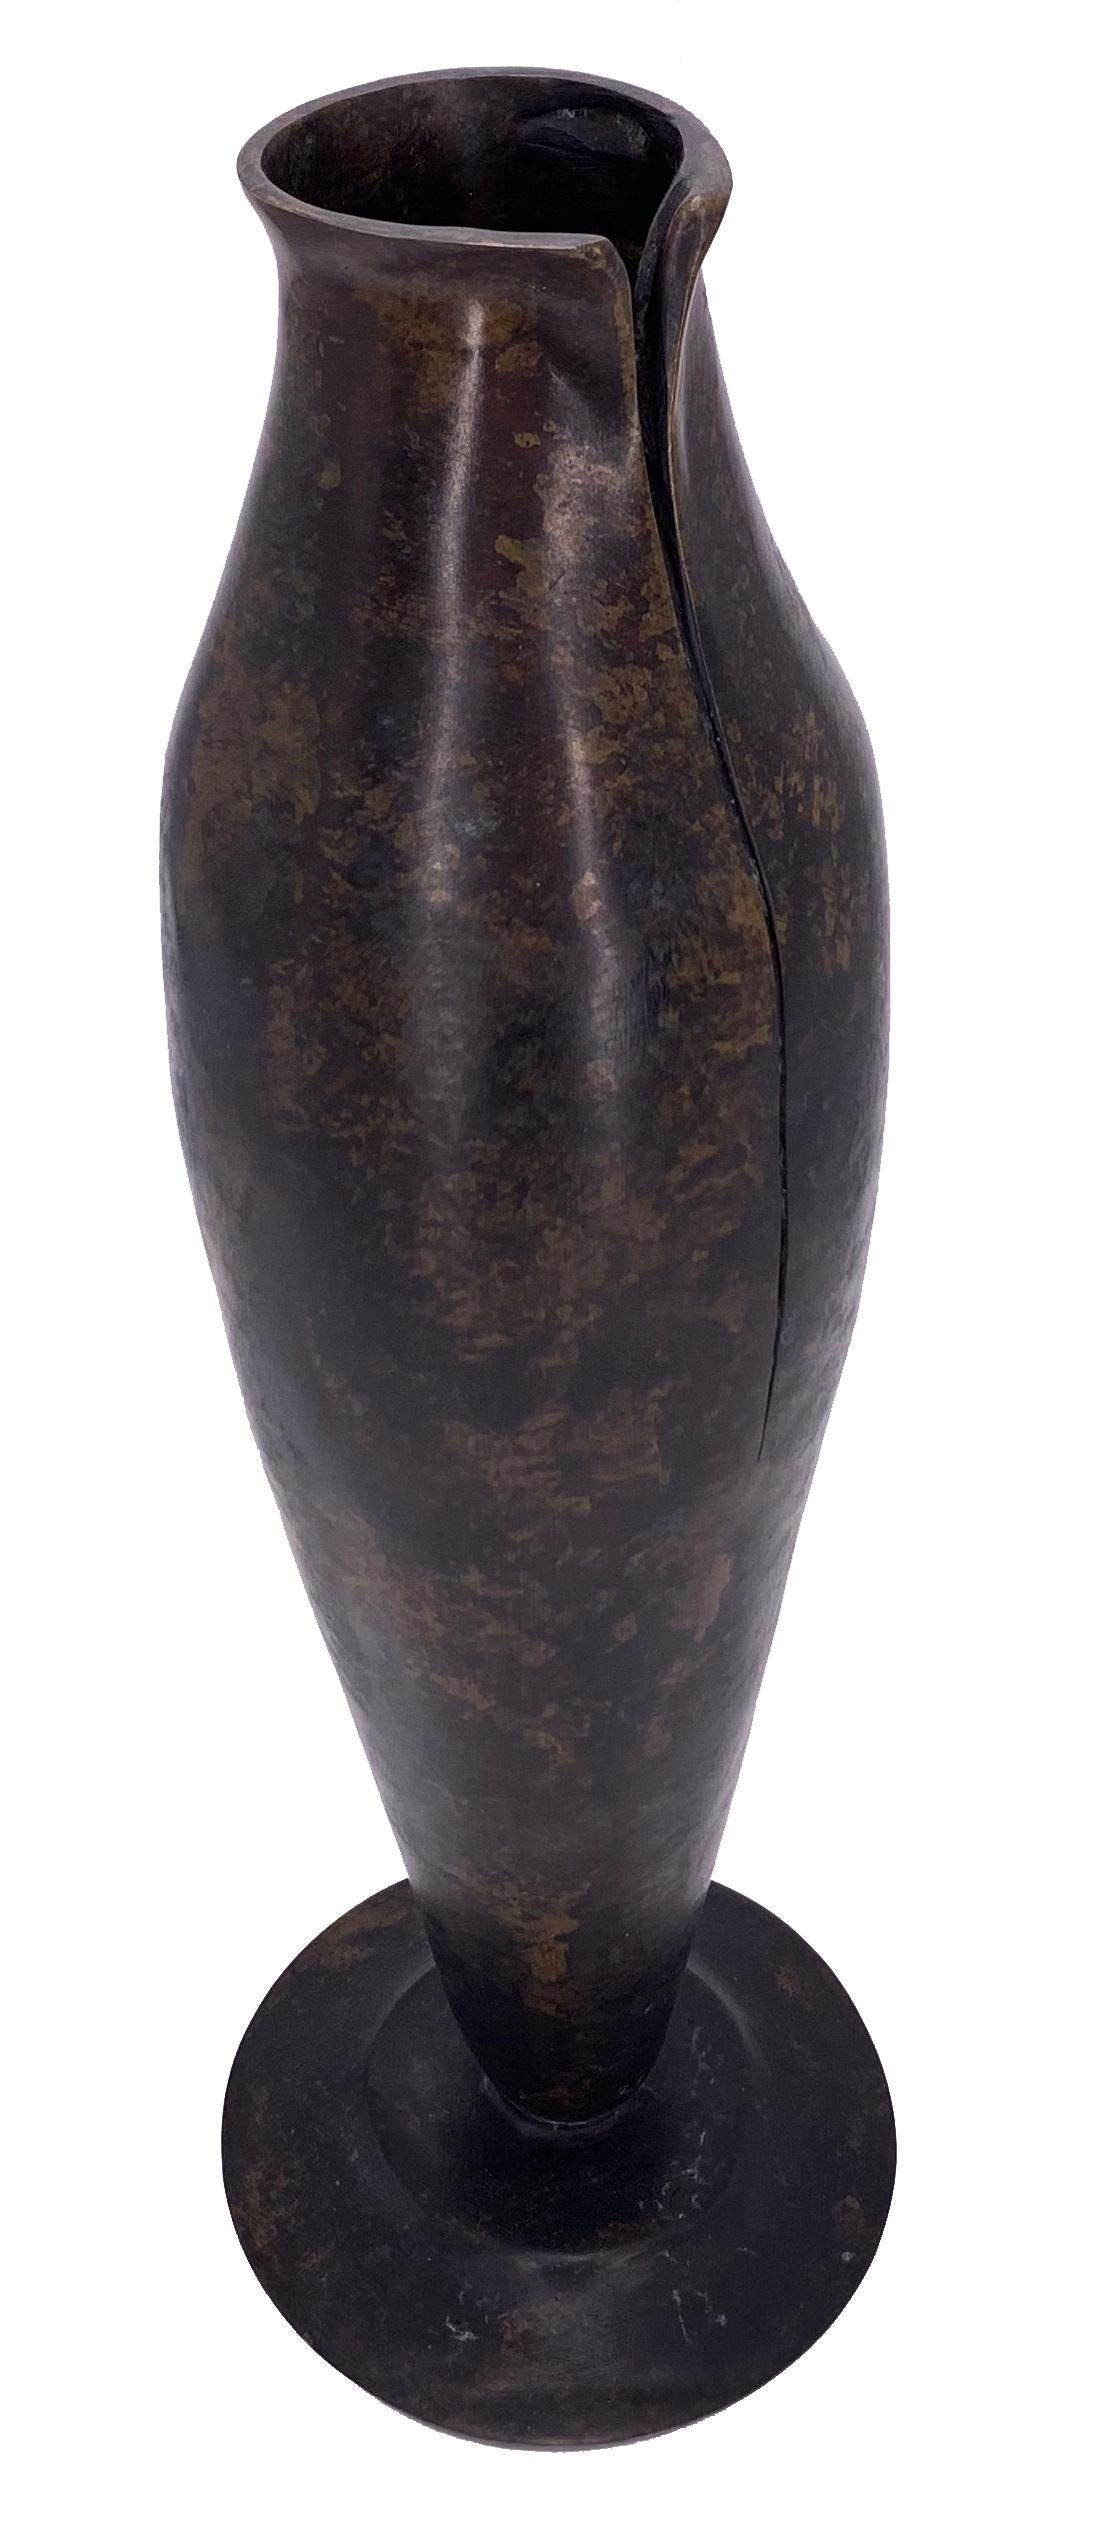 Larger quantities available upon request, with 8 weeks production time.

Description: Bronze Vase, The Gourd
Color: Bronze
Size: 14Ø x 42H cm
Material: Bronze
Collection: Mid Century Rhythm